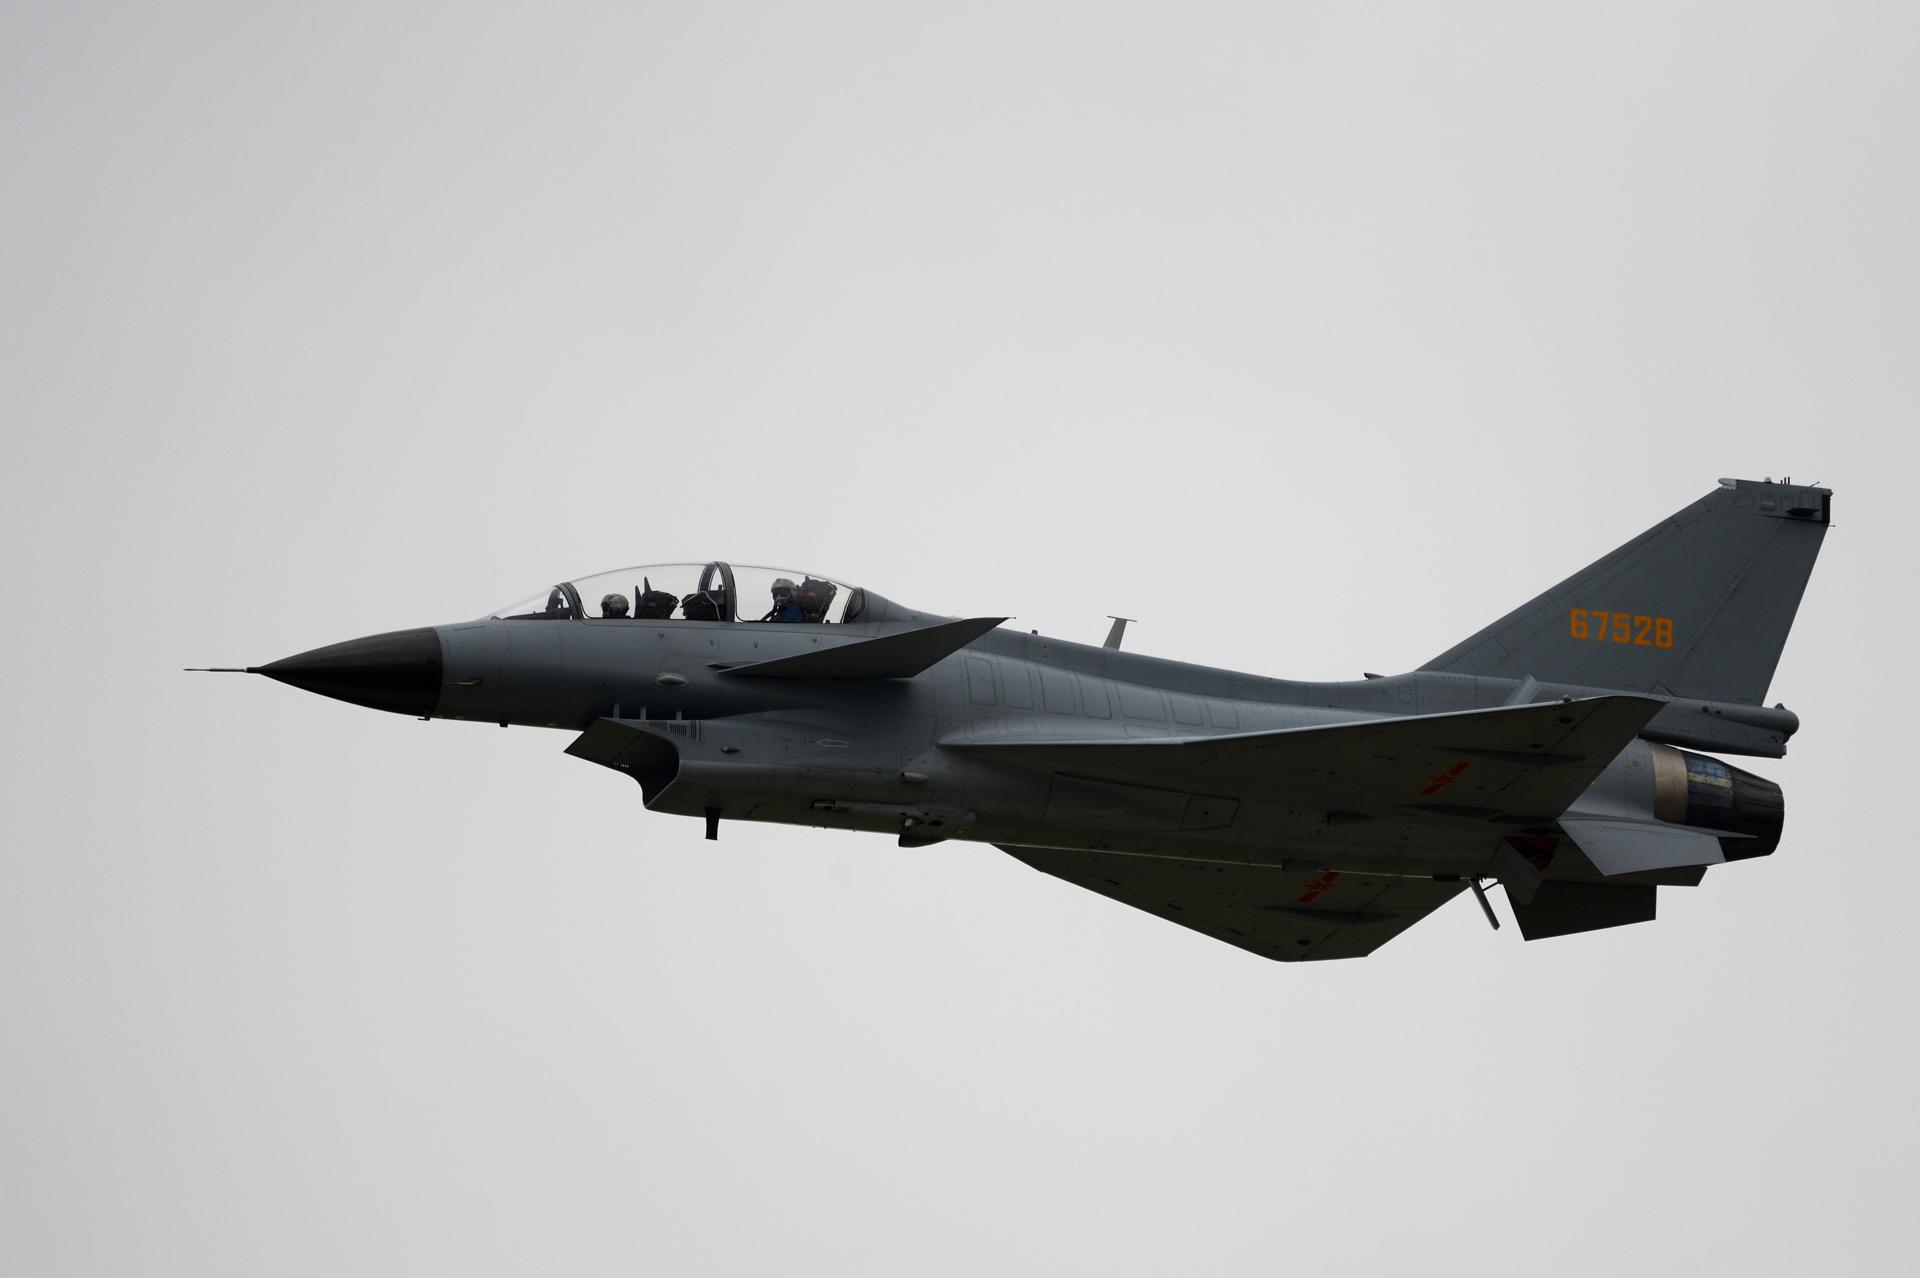 (FILE) A J-10BS fighter jet during a display flight as part of the aviation open day of the Air Force at Aviation University of Air Force in Changchun, China's Jilin province, 02 September 2018 (issued 05 September 2018). EPA/STRINGER CHINA OUT[CHINA OUT]